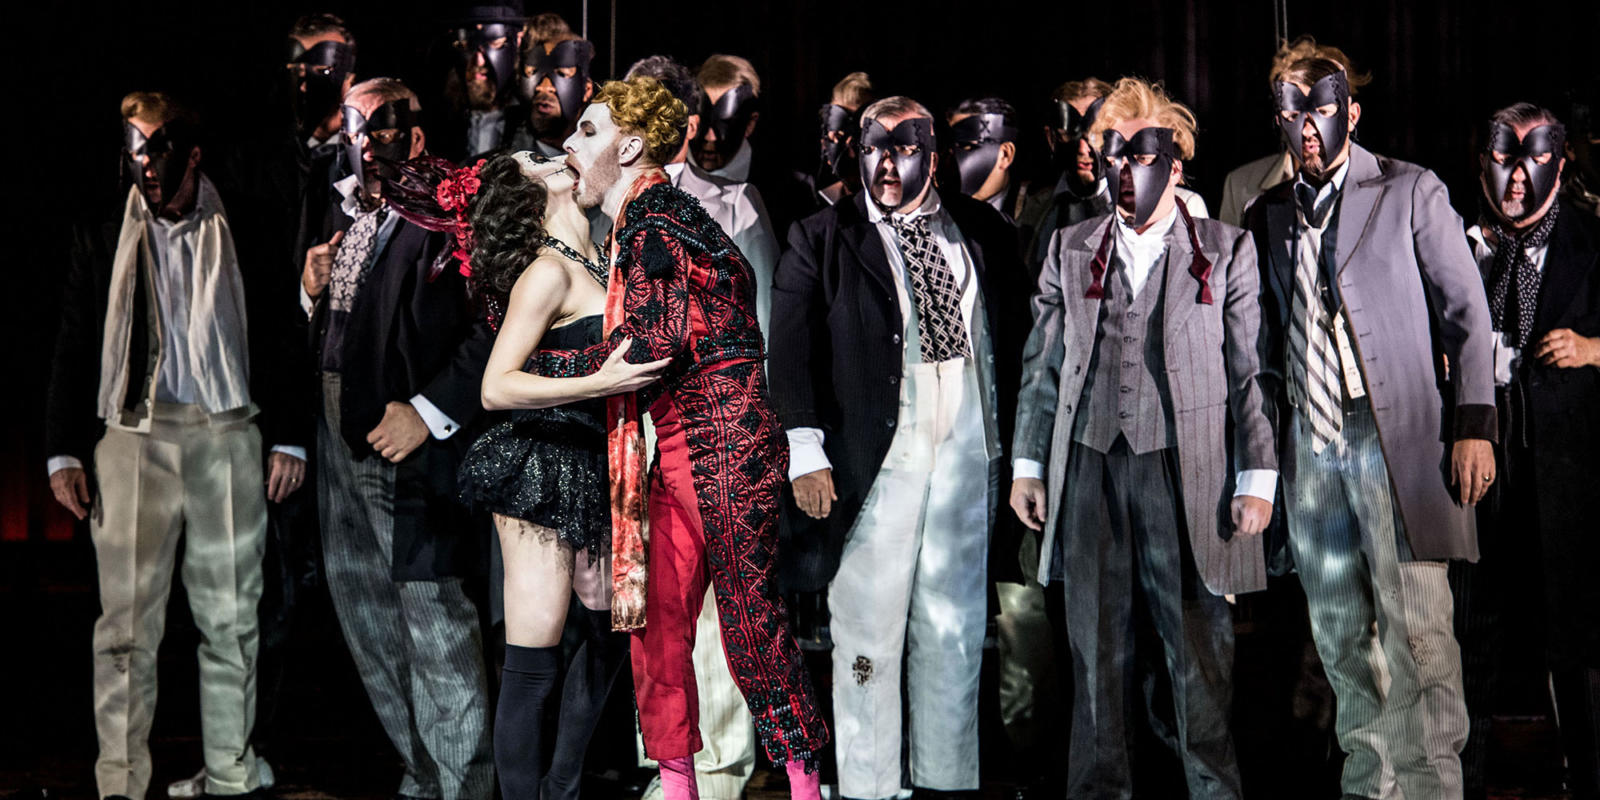 a group of people in masks, a man at the front biting a women's cheek